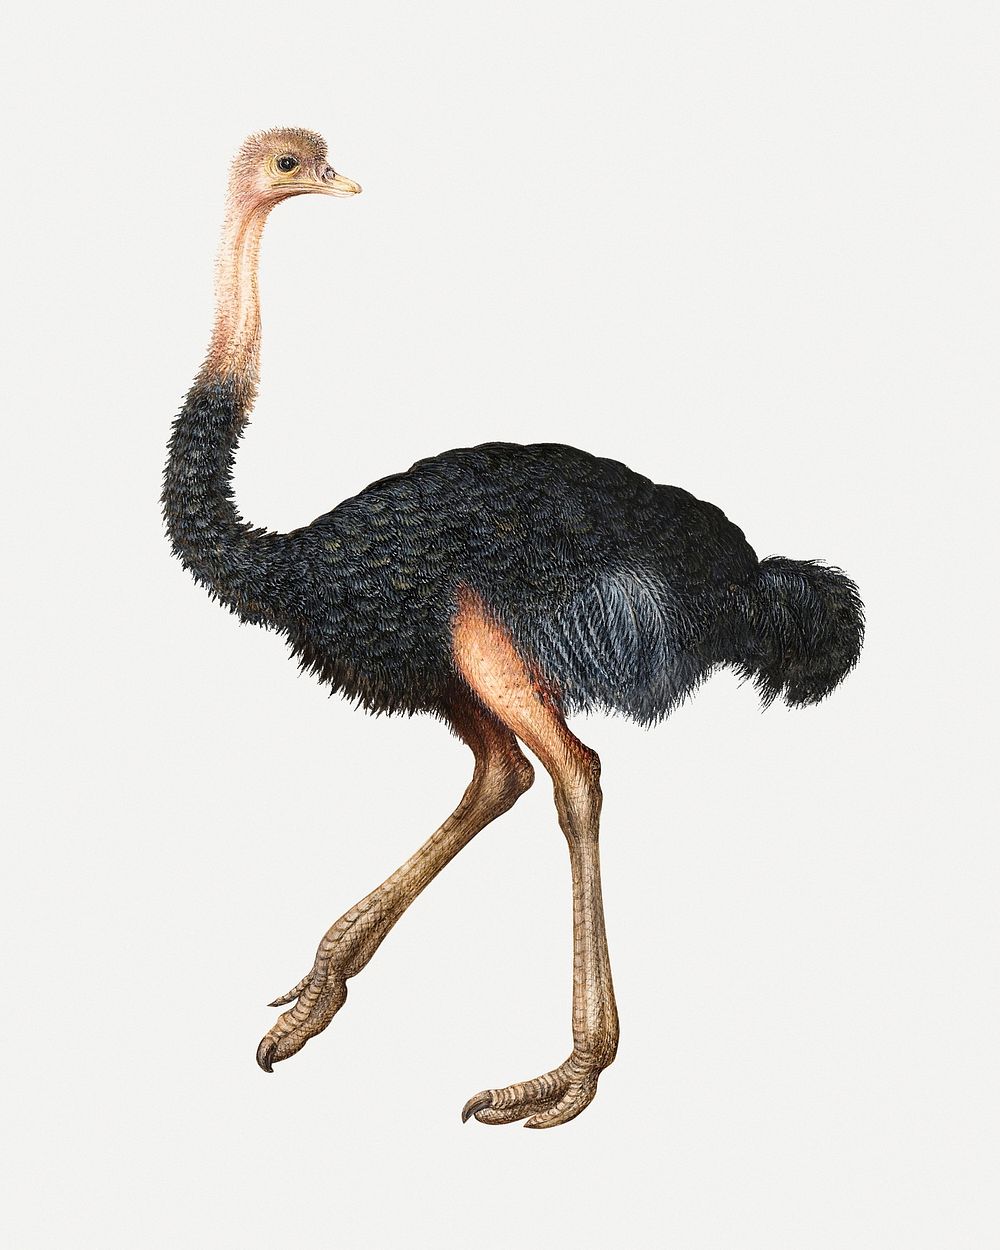 Ostrich psd animal painting, remixed from artworks by Joris Hoefnagel